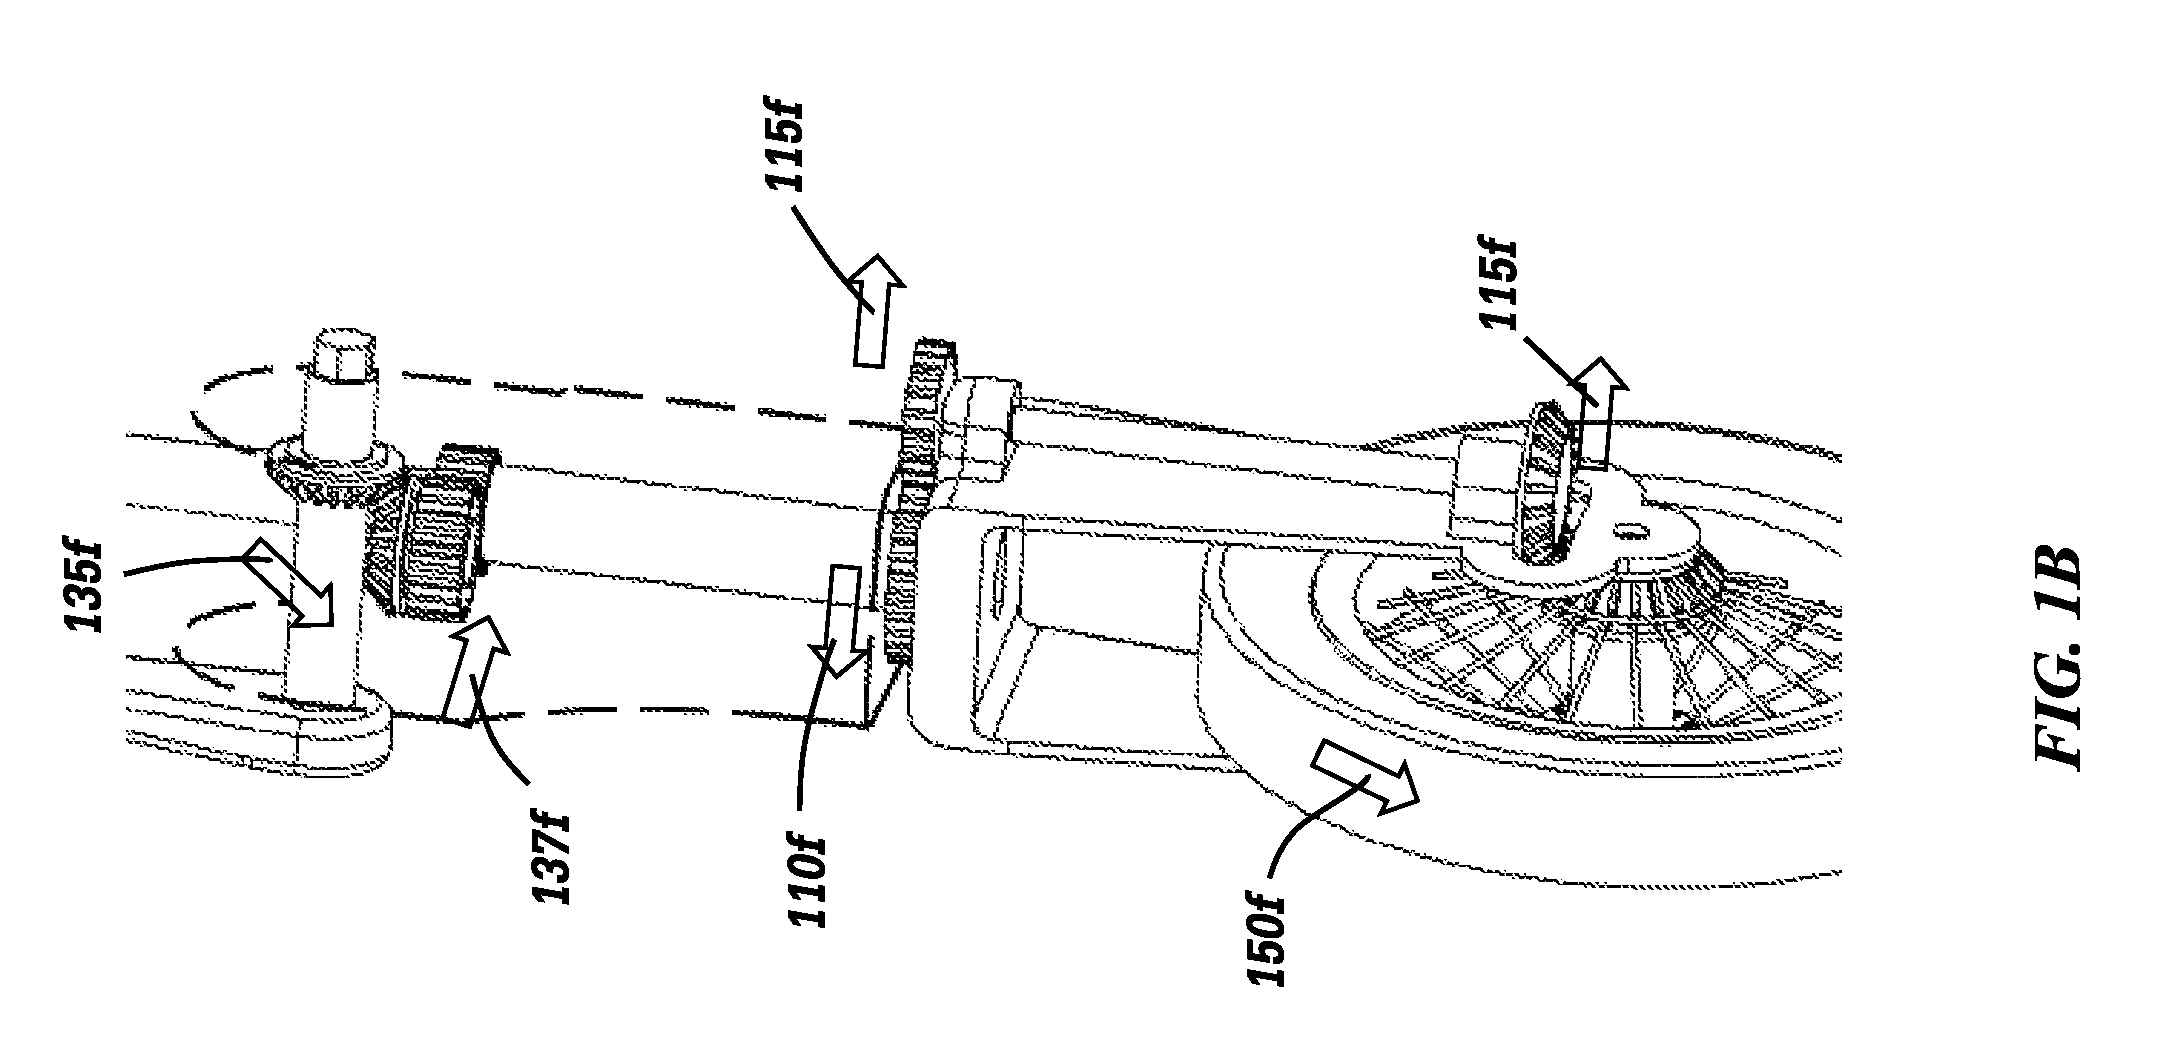 Drive-and-steering mechanisms used in the design of compact, carry-on vehicles